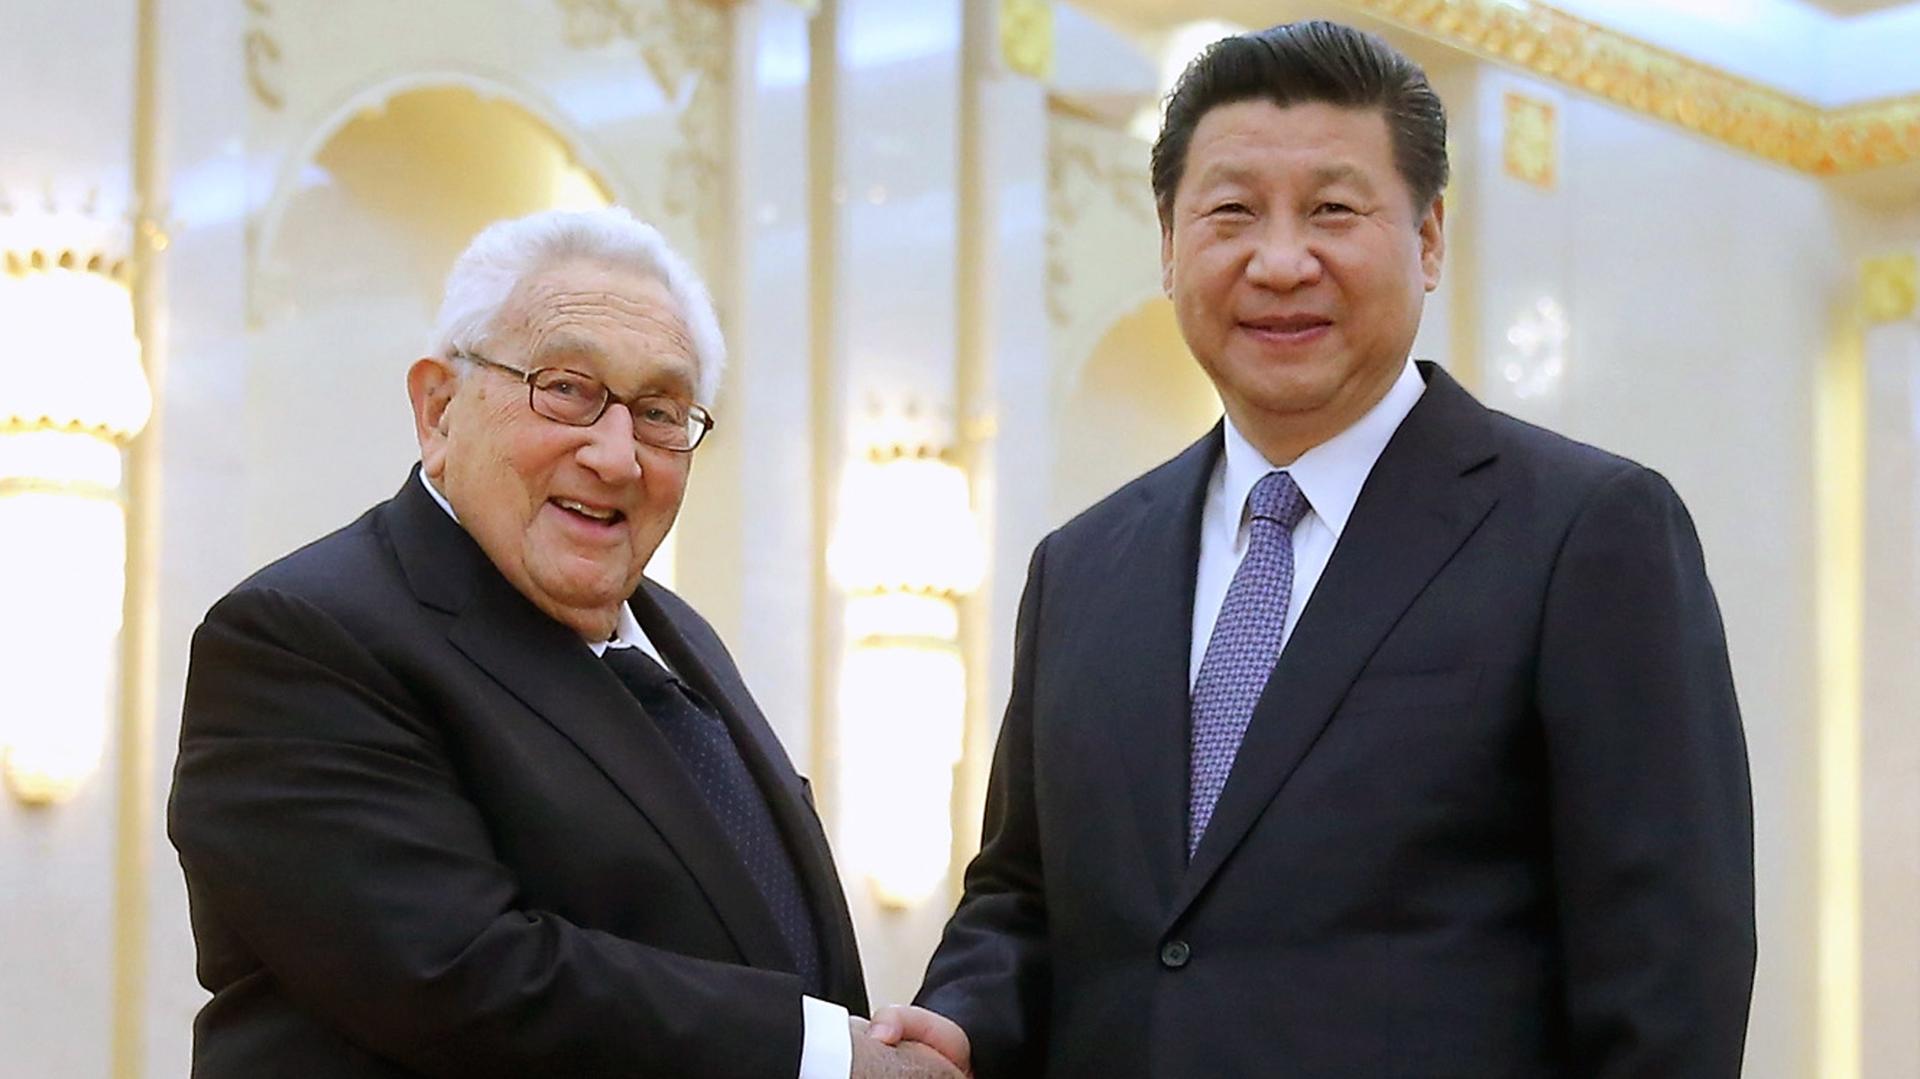 Chinese President Xi Jinping (R) shakes hands with one of American history’s greatest statesman, Henry Kissinger, at the Great Hall of the People in Beijing on March 17, 2015.